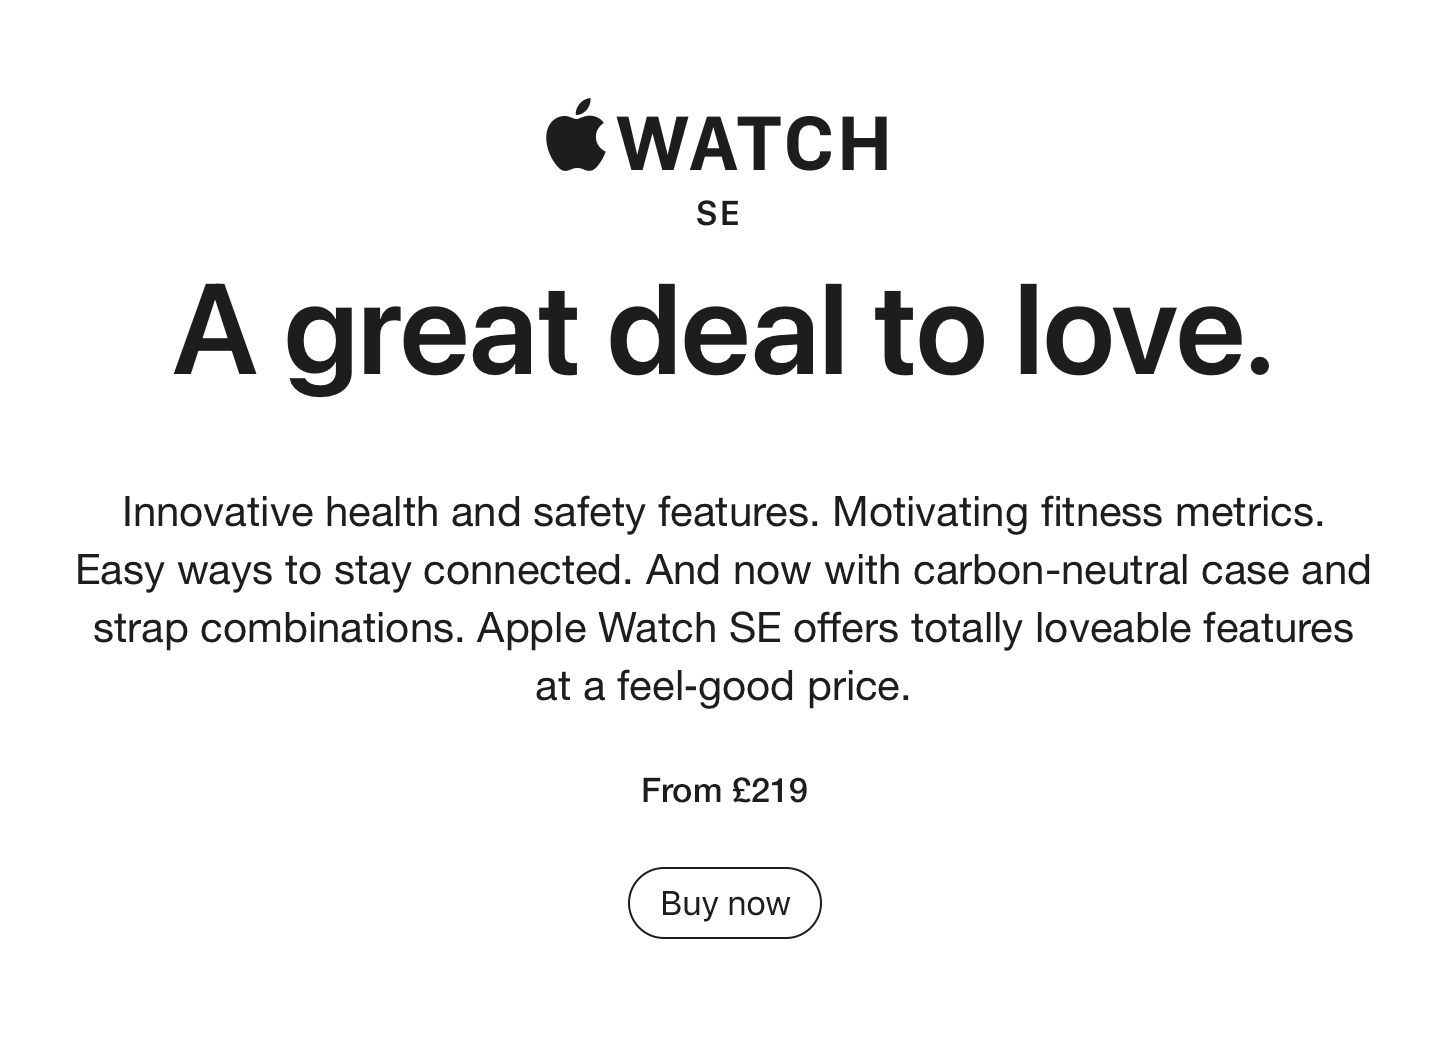 Apple Watch SE. A great deal to love.